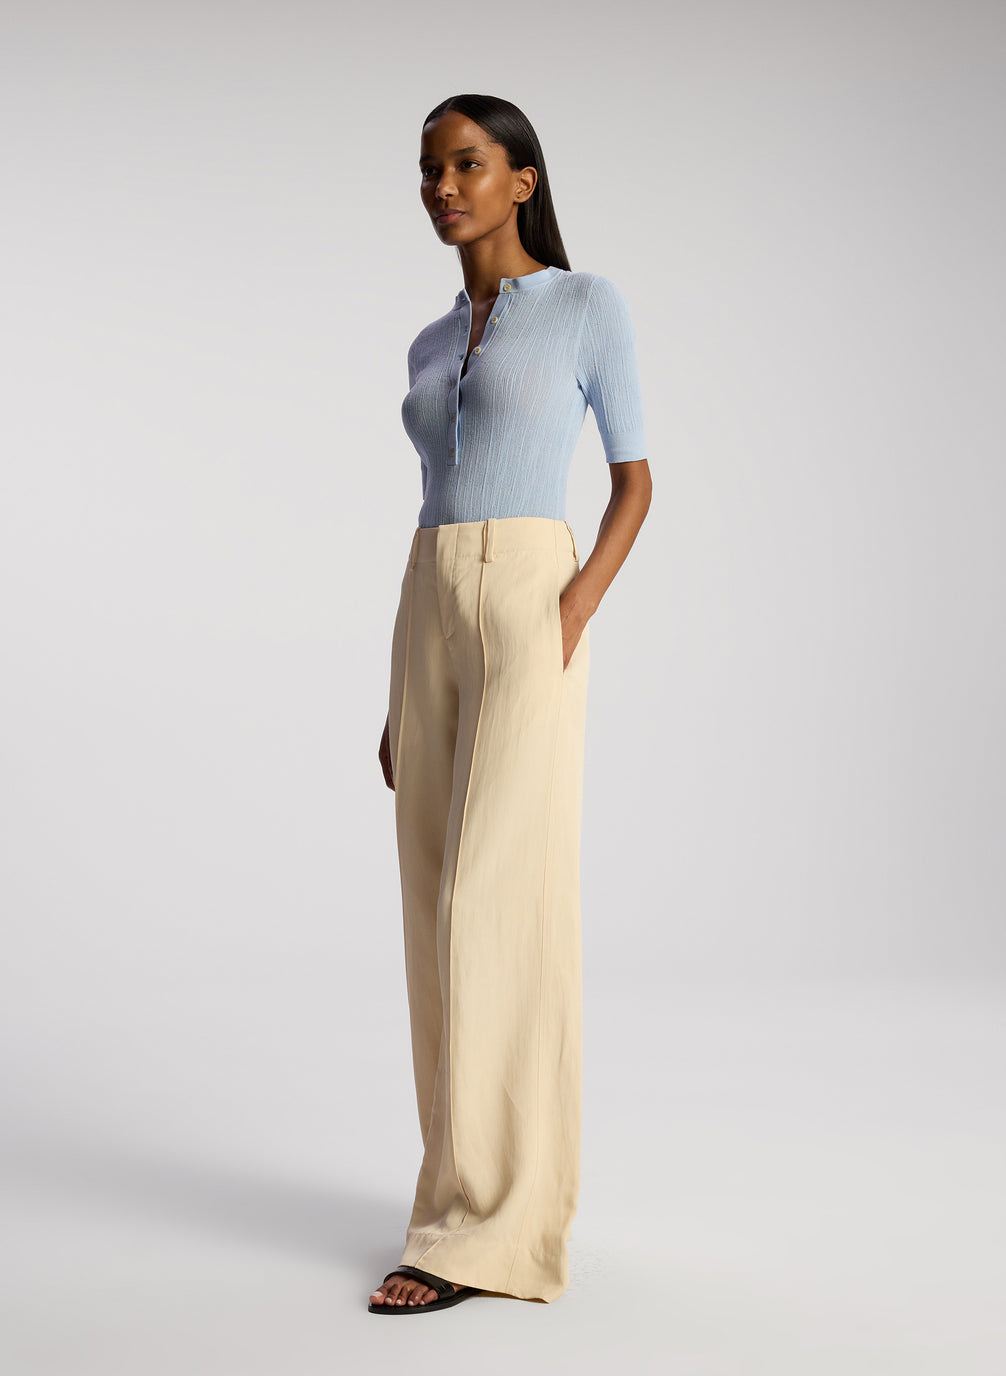 side view of woman wearing blue top and cream pants